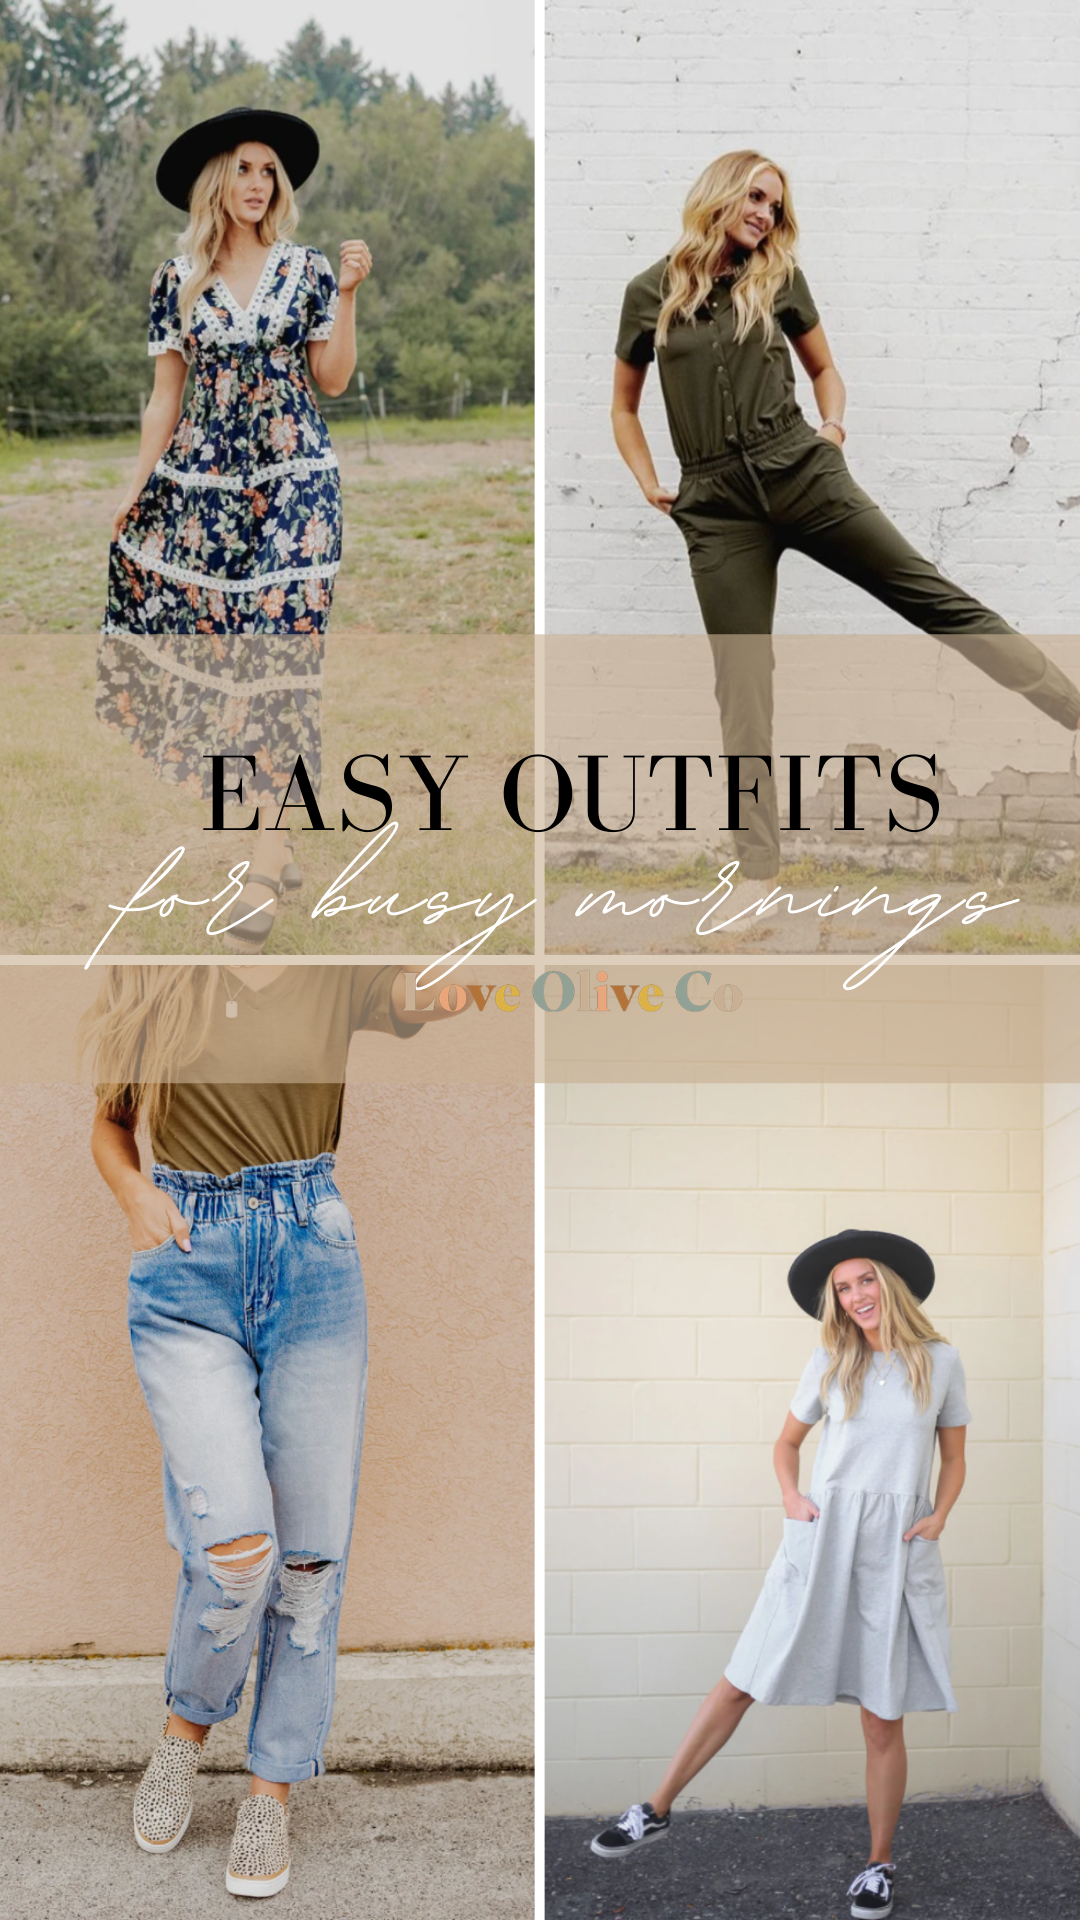 easy outfits for busy mornings. www.loveoliveco.com